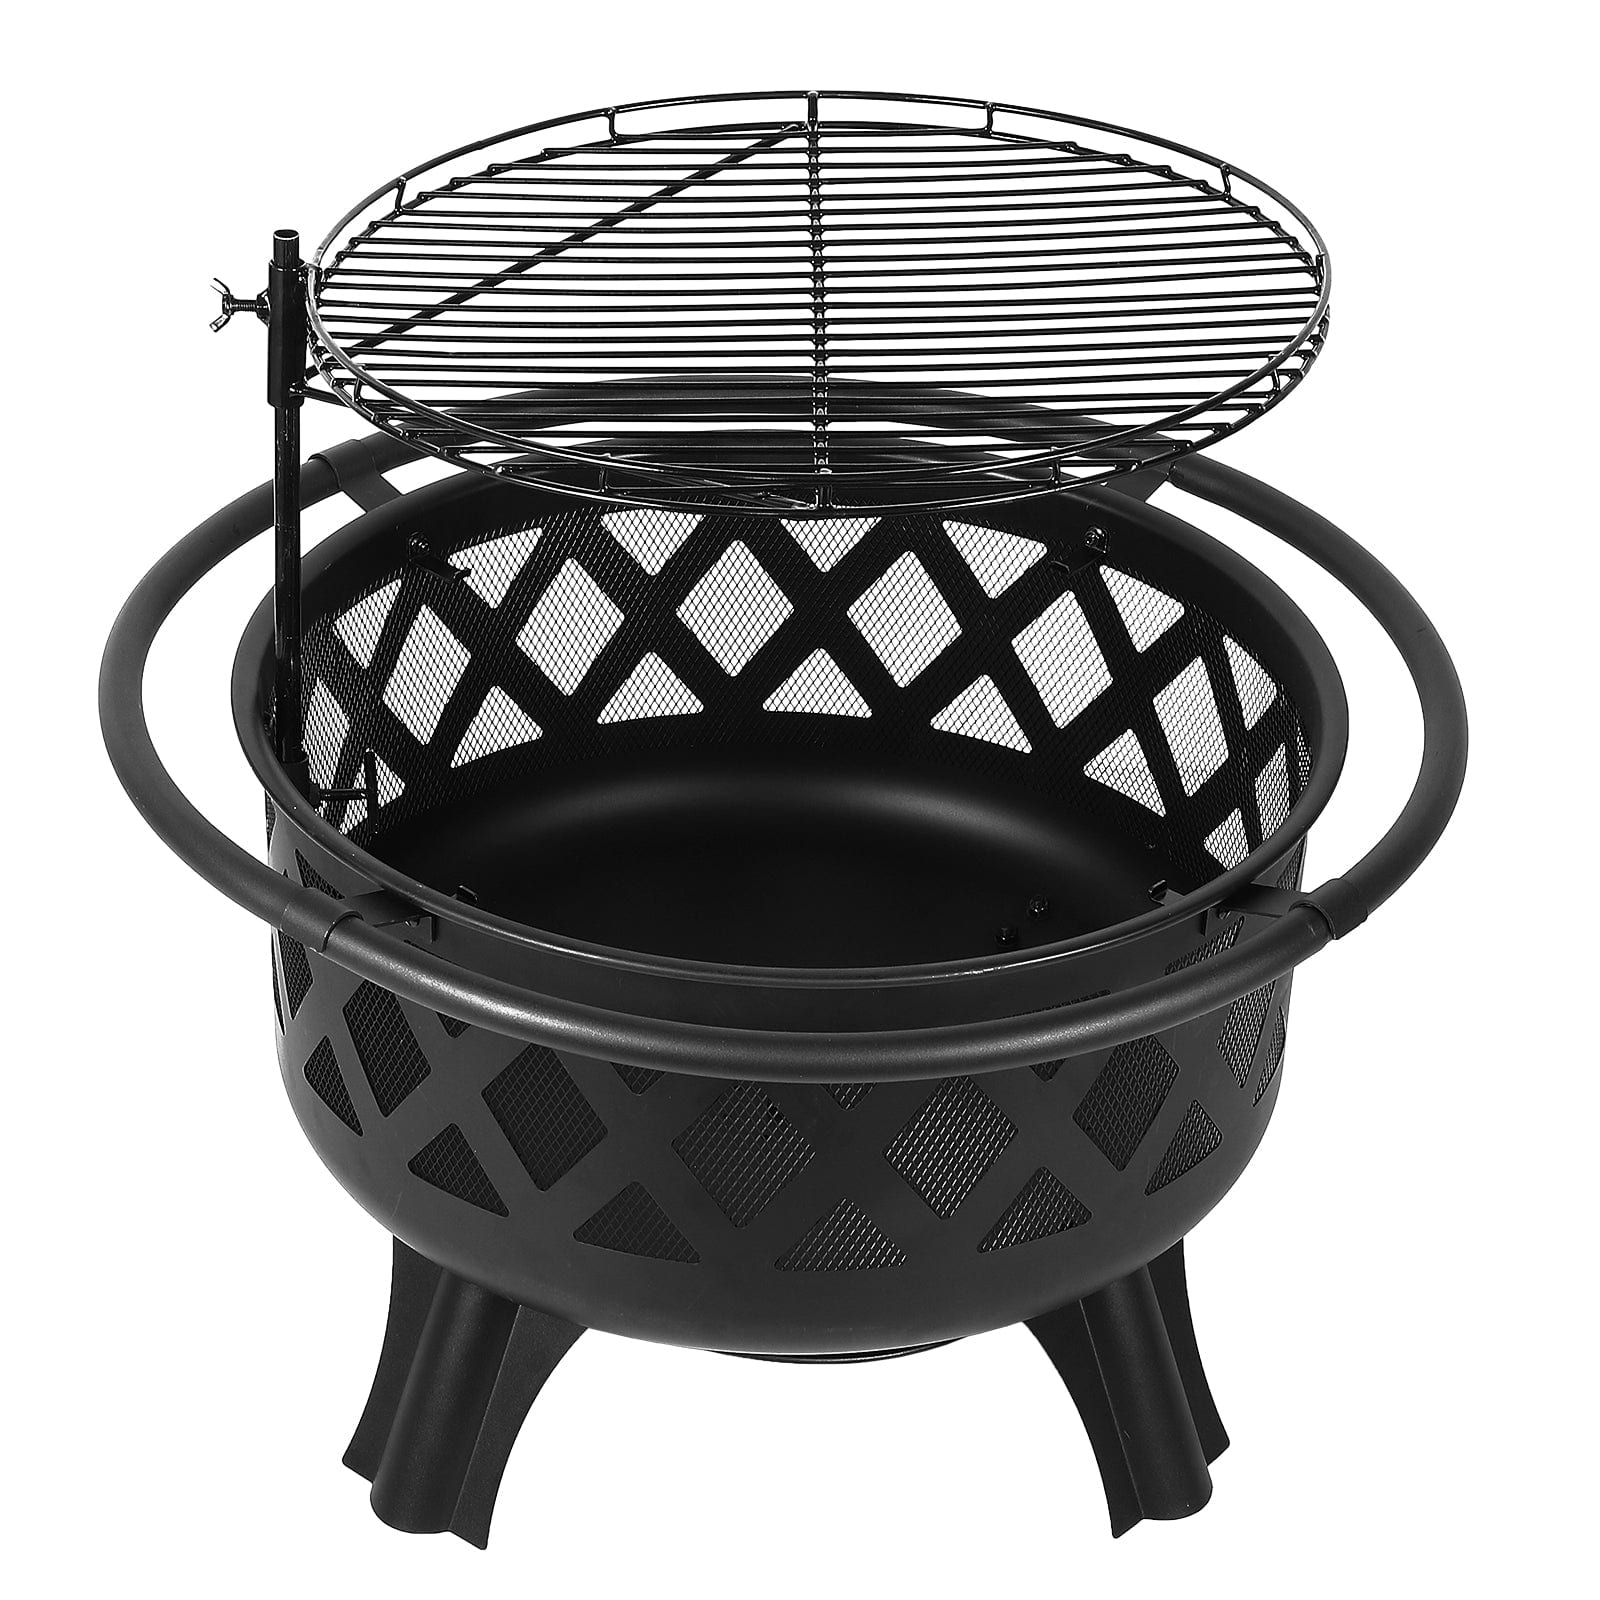 30 inch Wood Burning Fire Pit with Grill and Spark Screen - GARVEE